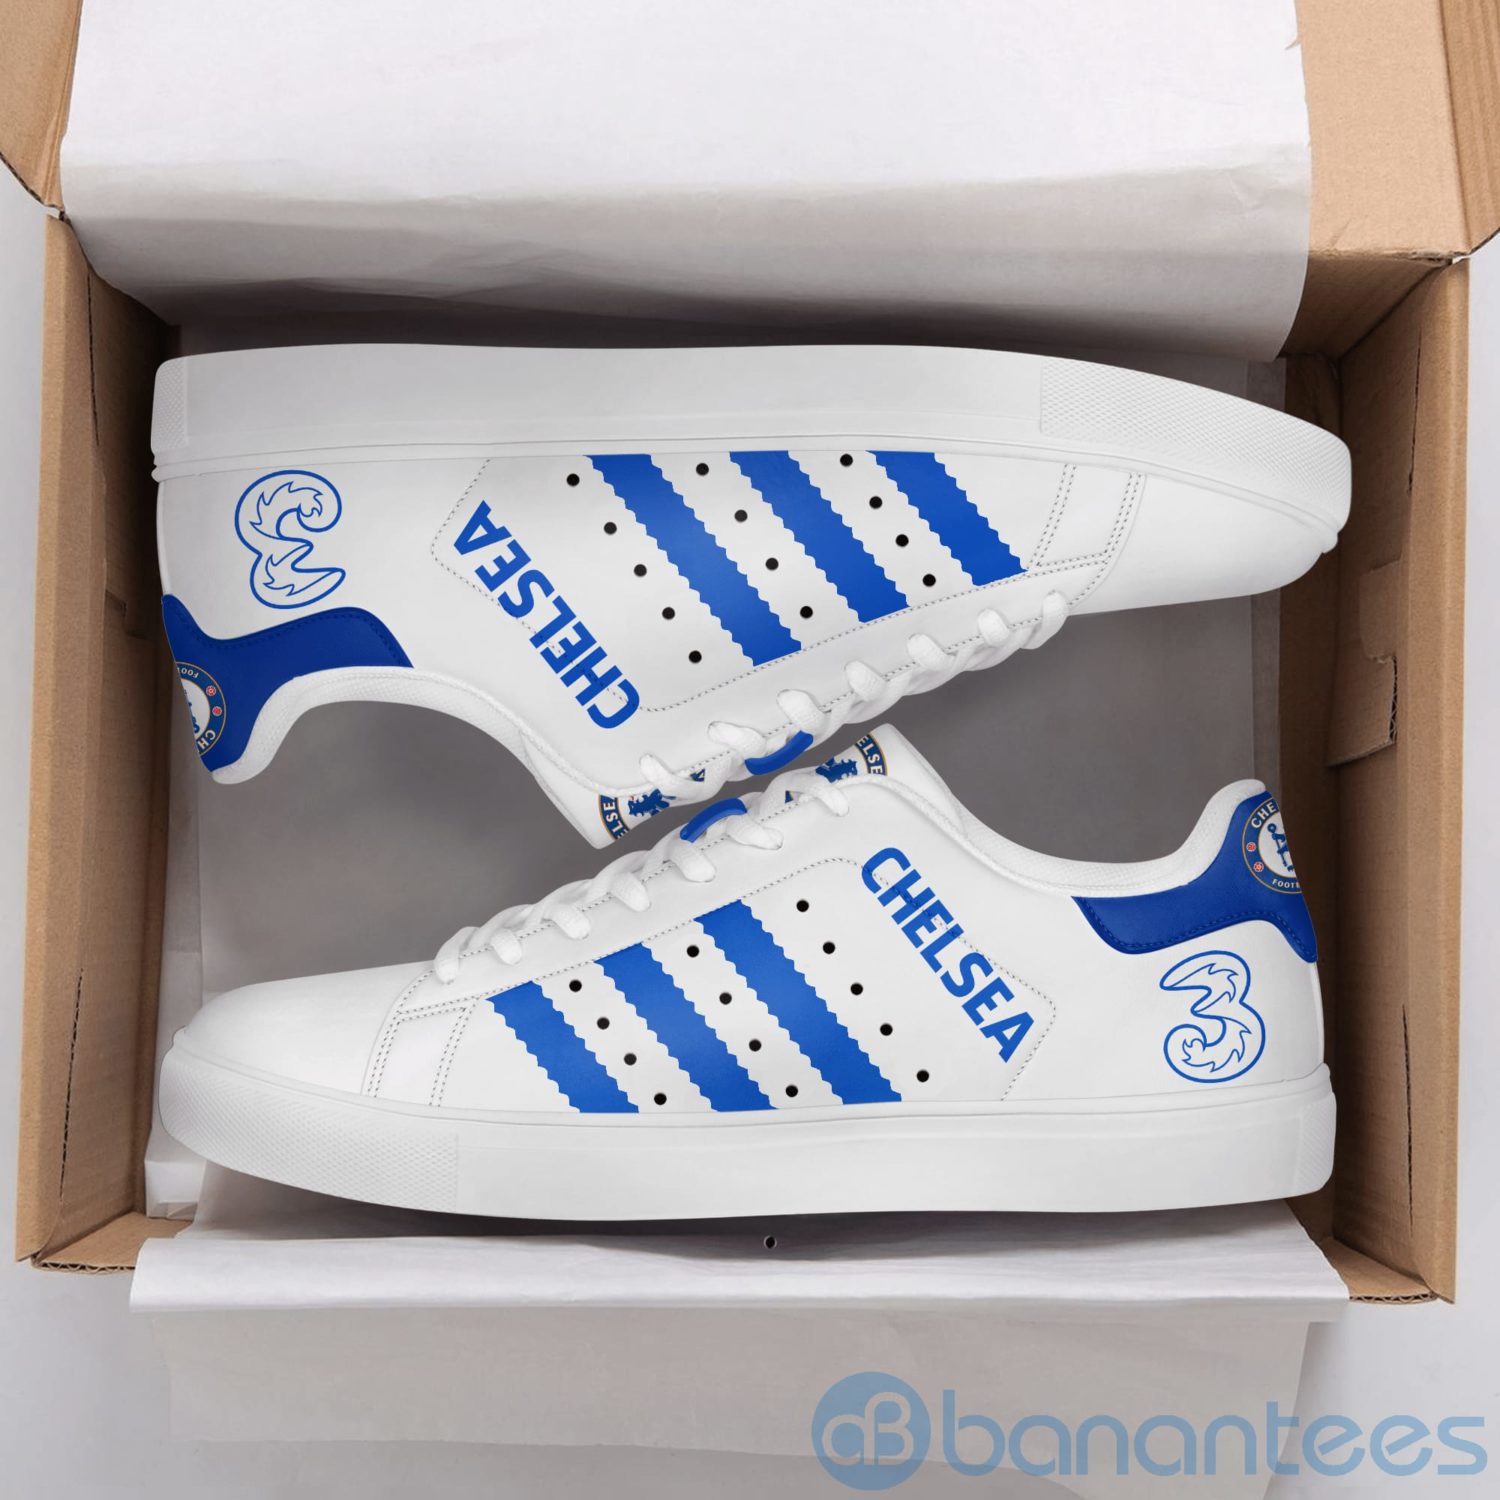 Chelsea Fc Blue Striped White Low Top Skate Shoes